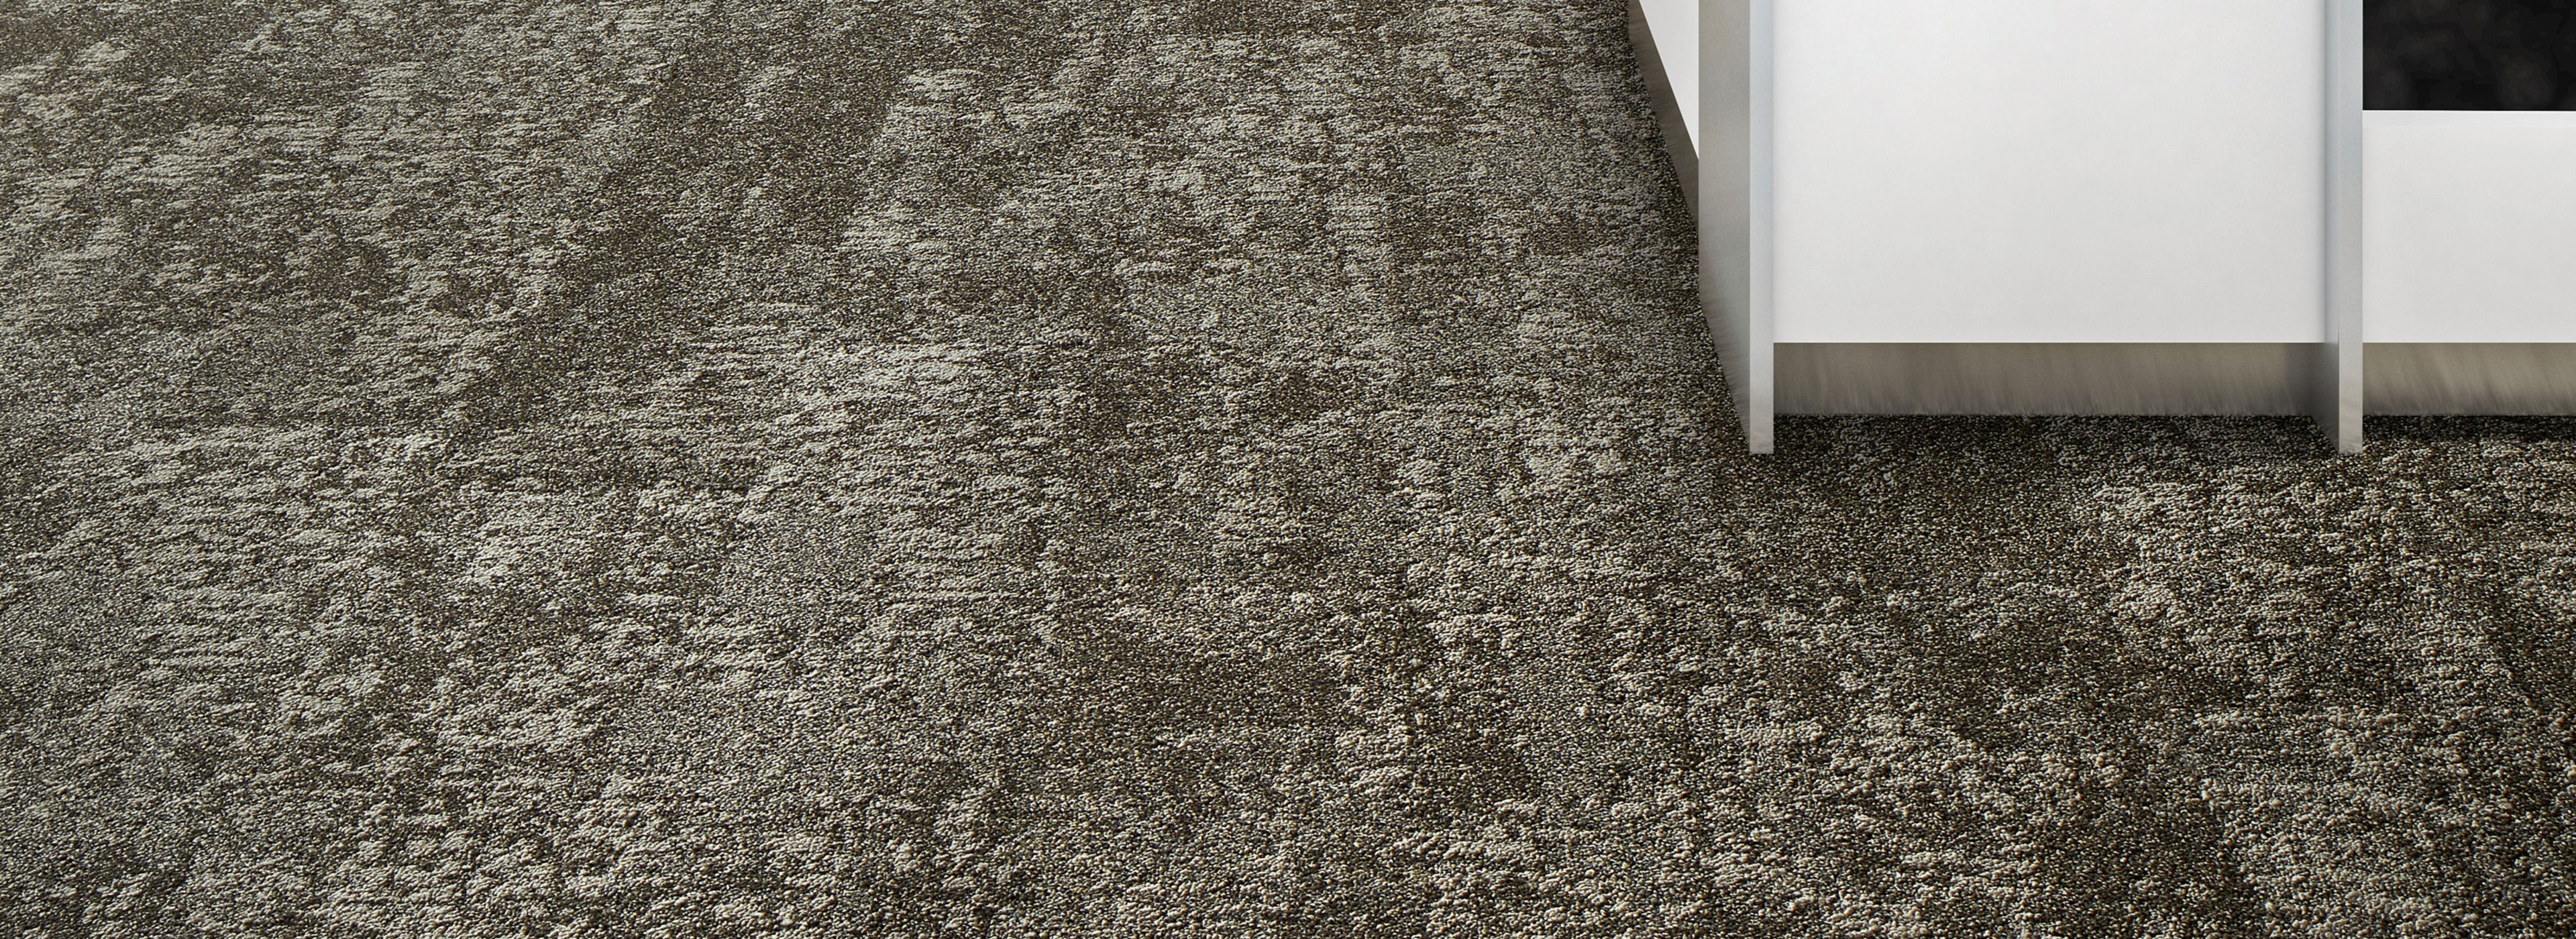 Interface Just Deserts plank carpet tile in lobby area with Plant-astic LVT in corridor imagen número 1